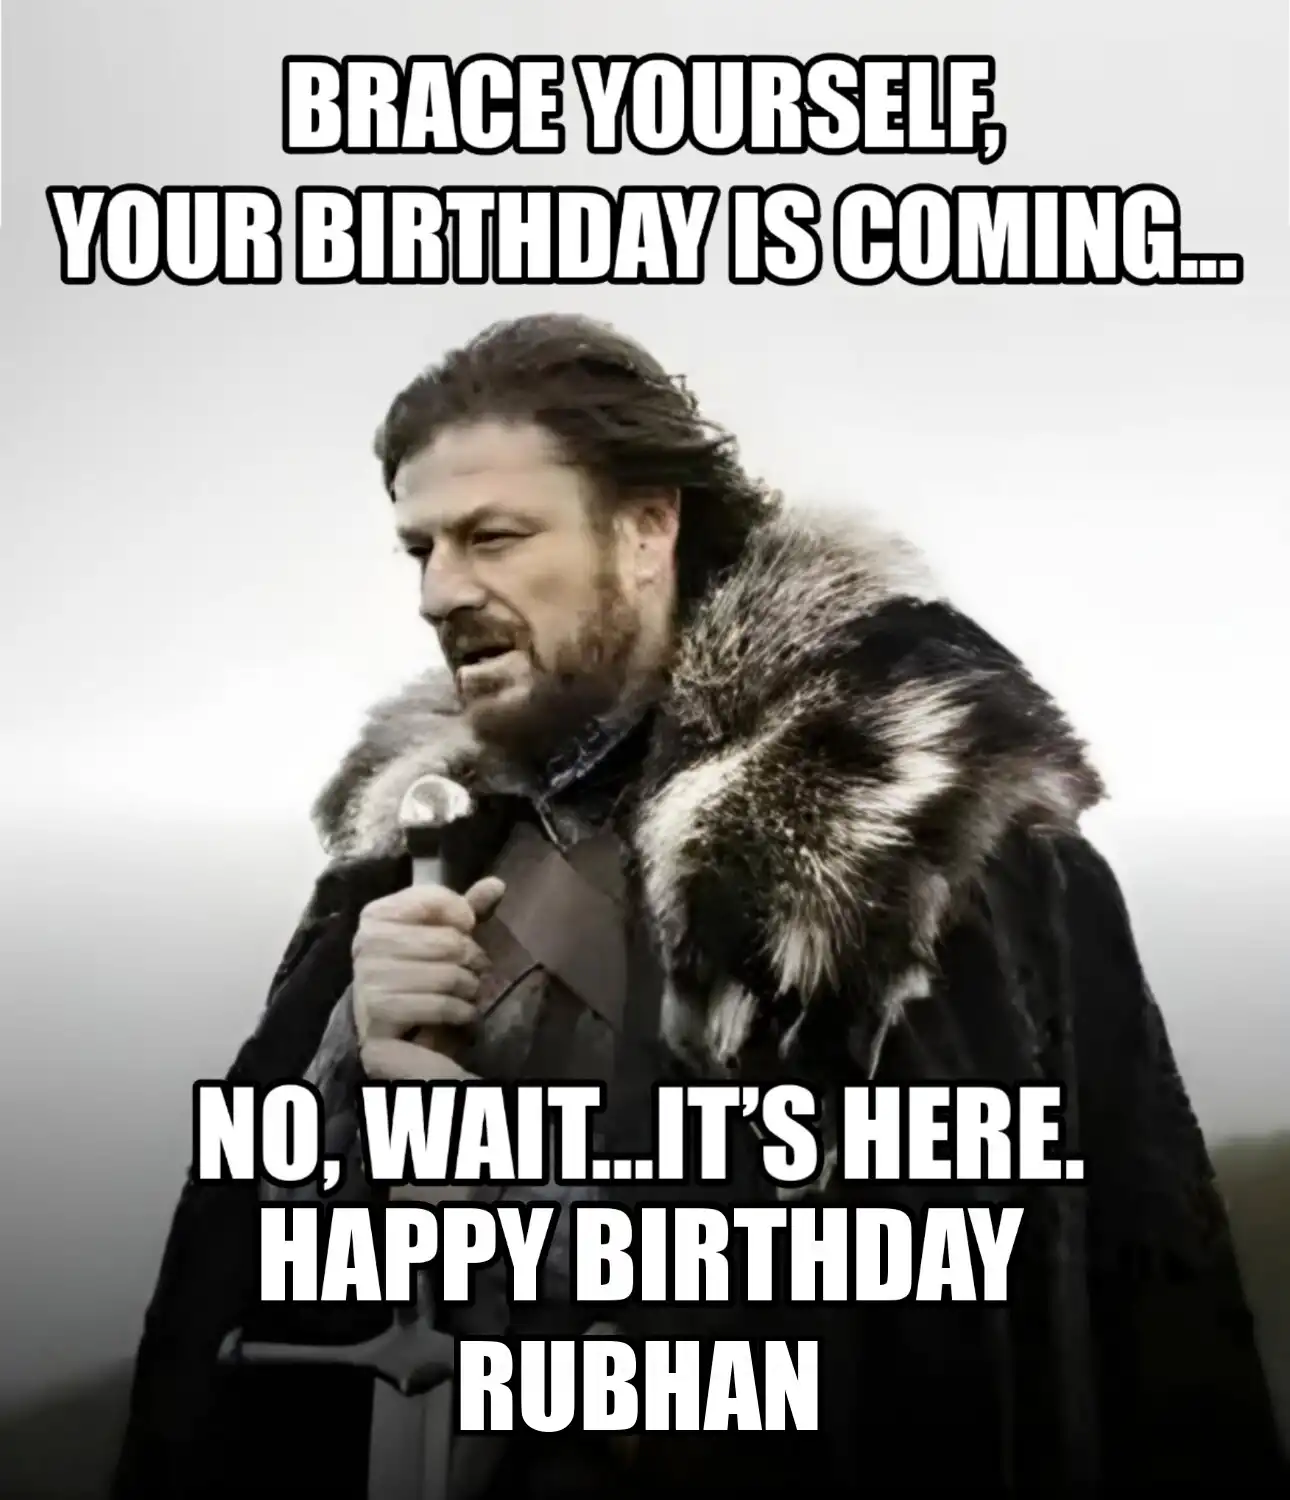 Happy Birthday Rubhan Brace Yourself Your Birthday Is Coming Meme